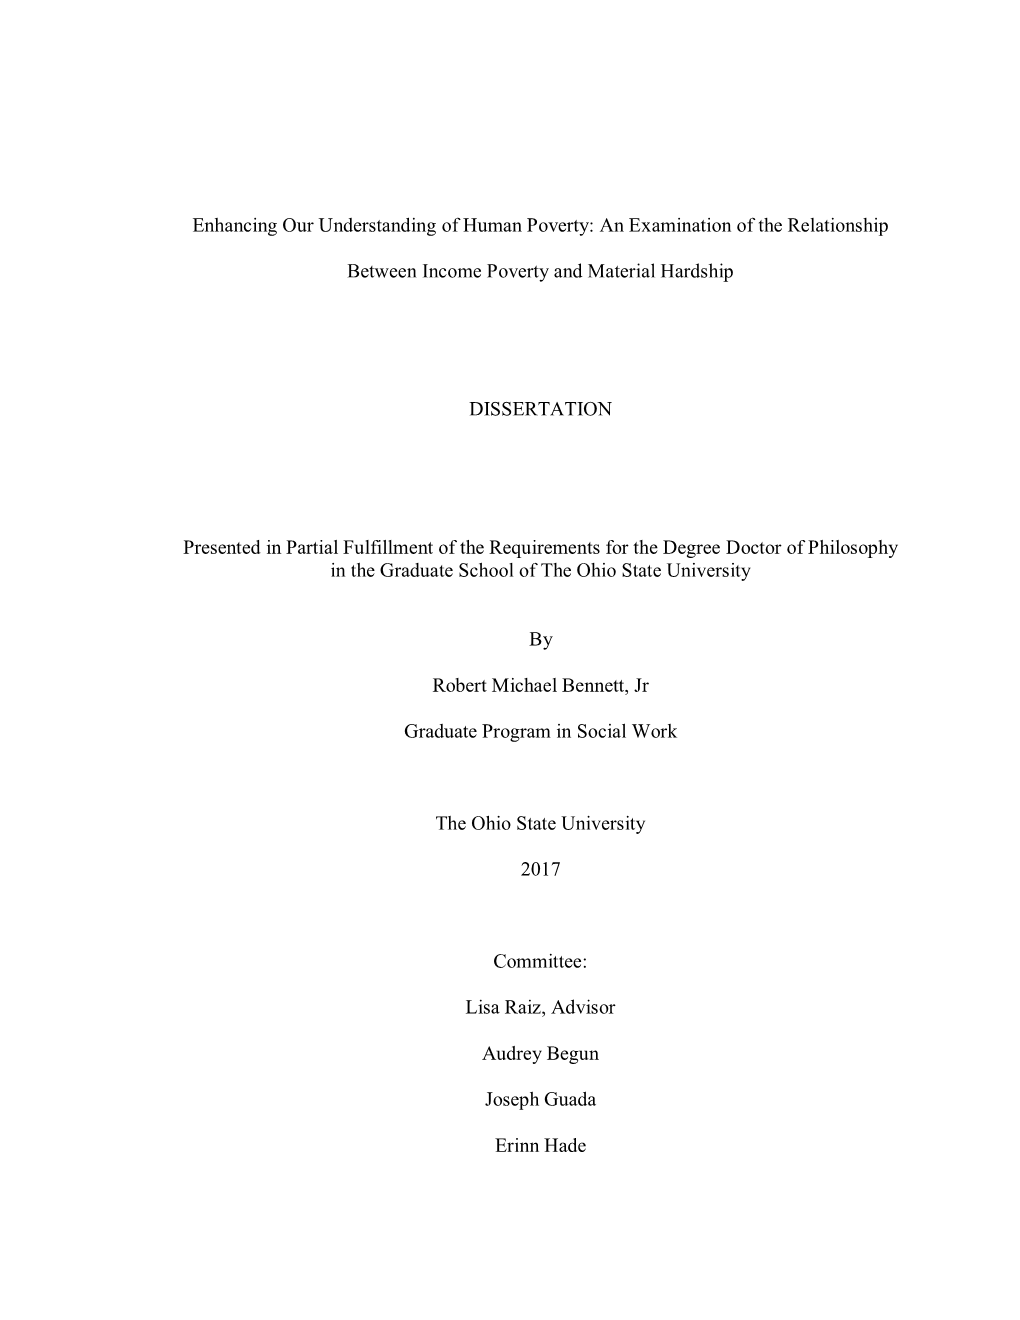 Enhancing Our Understanding of Human Poverty: an Examination of the Relationship